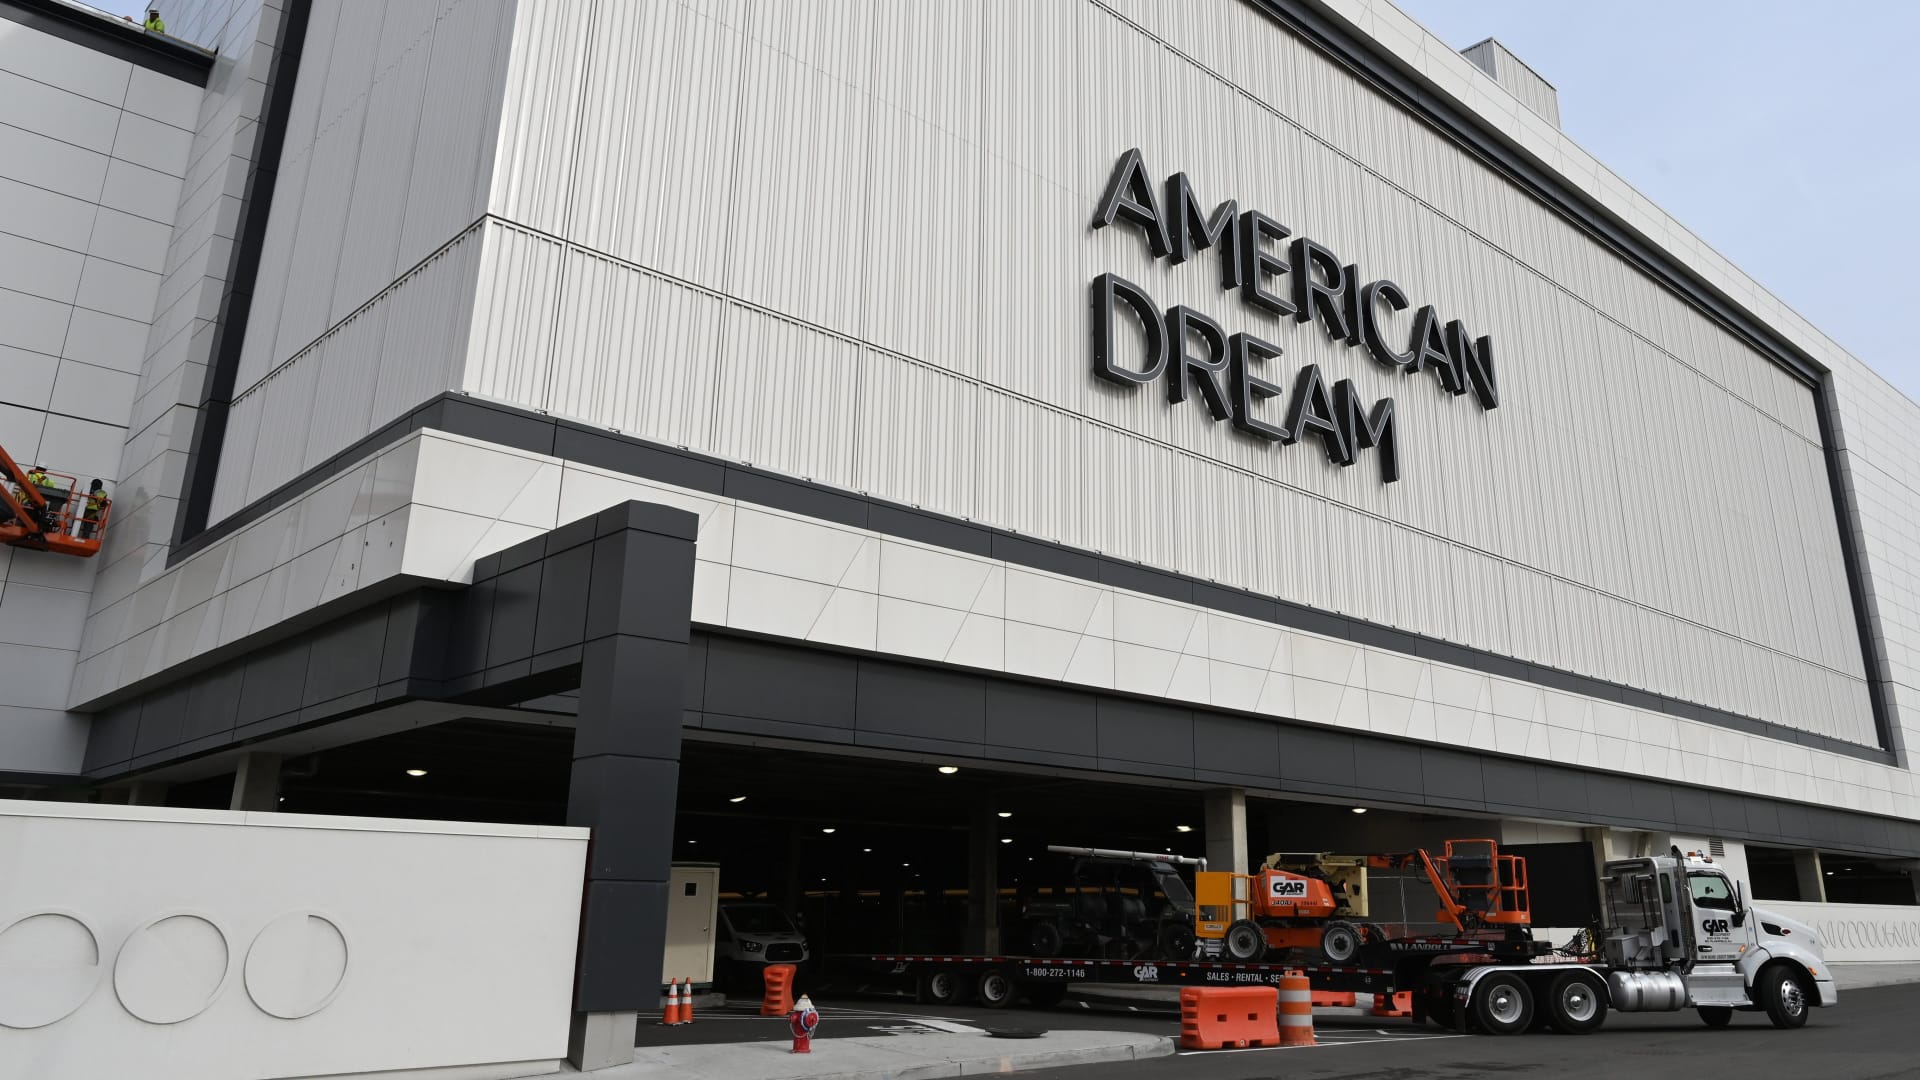 American Dream megamall and entertainment complex in East Rutherford, N.J. After more than 17 years in the making, it finally opened October 25, 2019. Then came the coronoavirus pandemic.